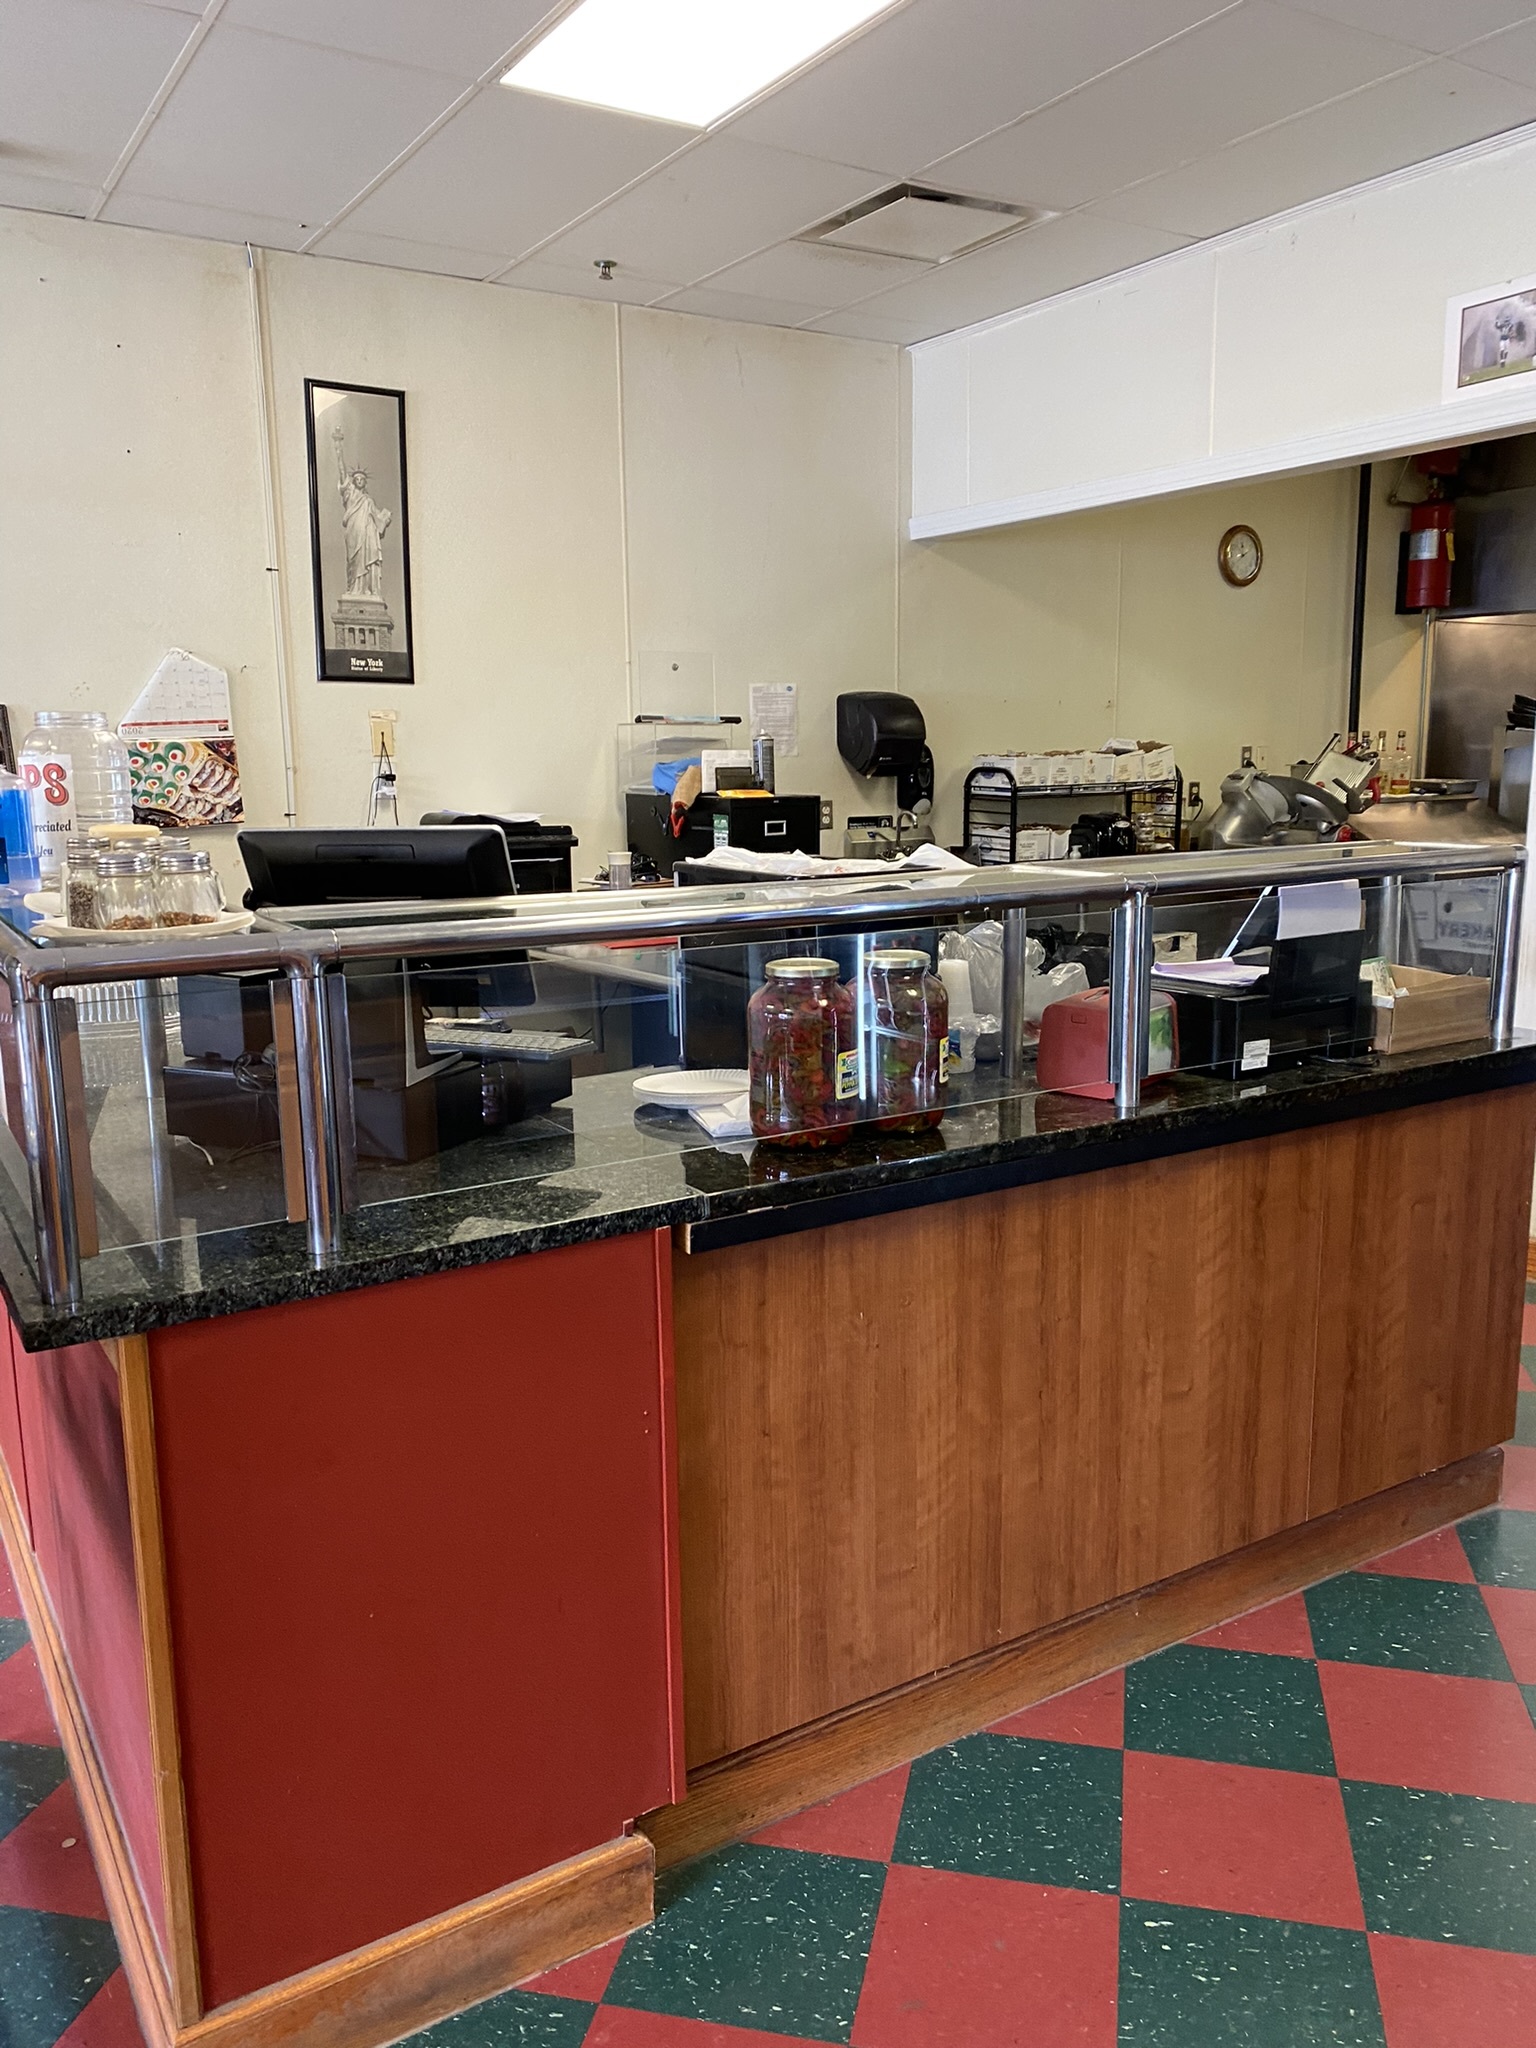 Pizzeria/Restaurant Assets For Sale in PA